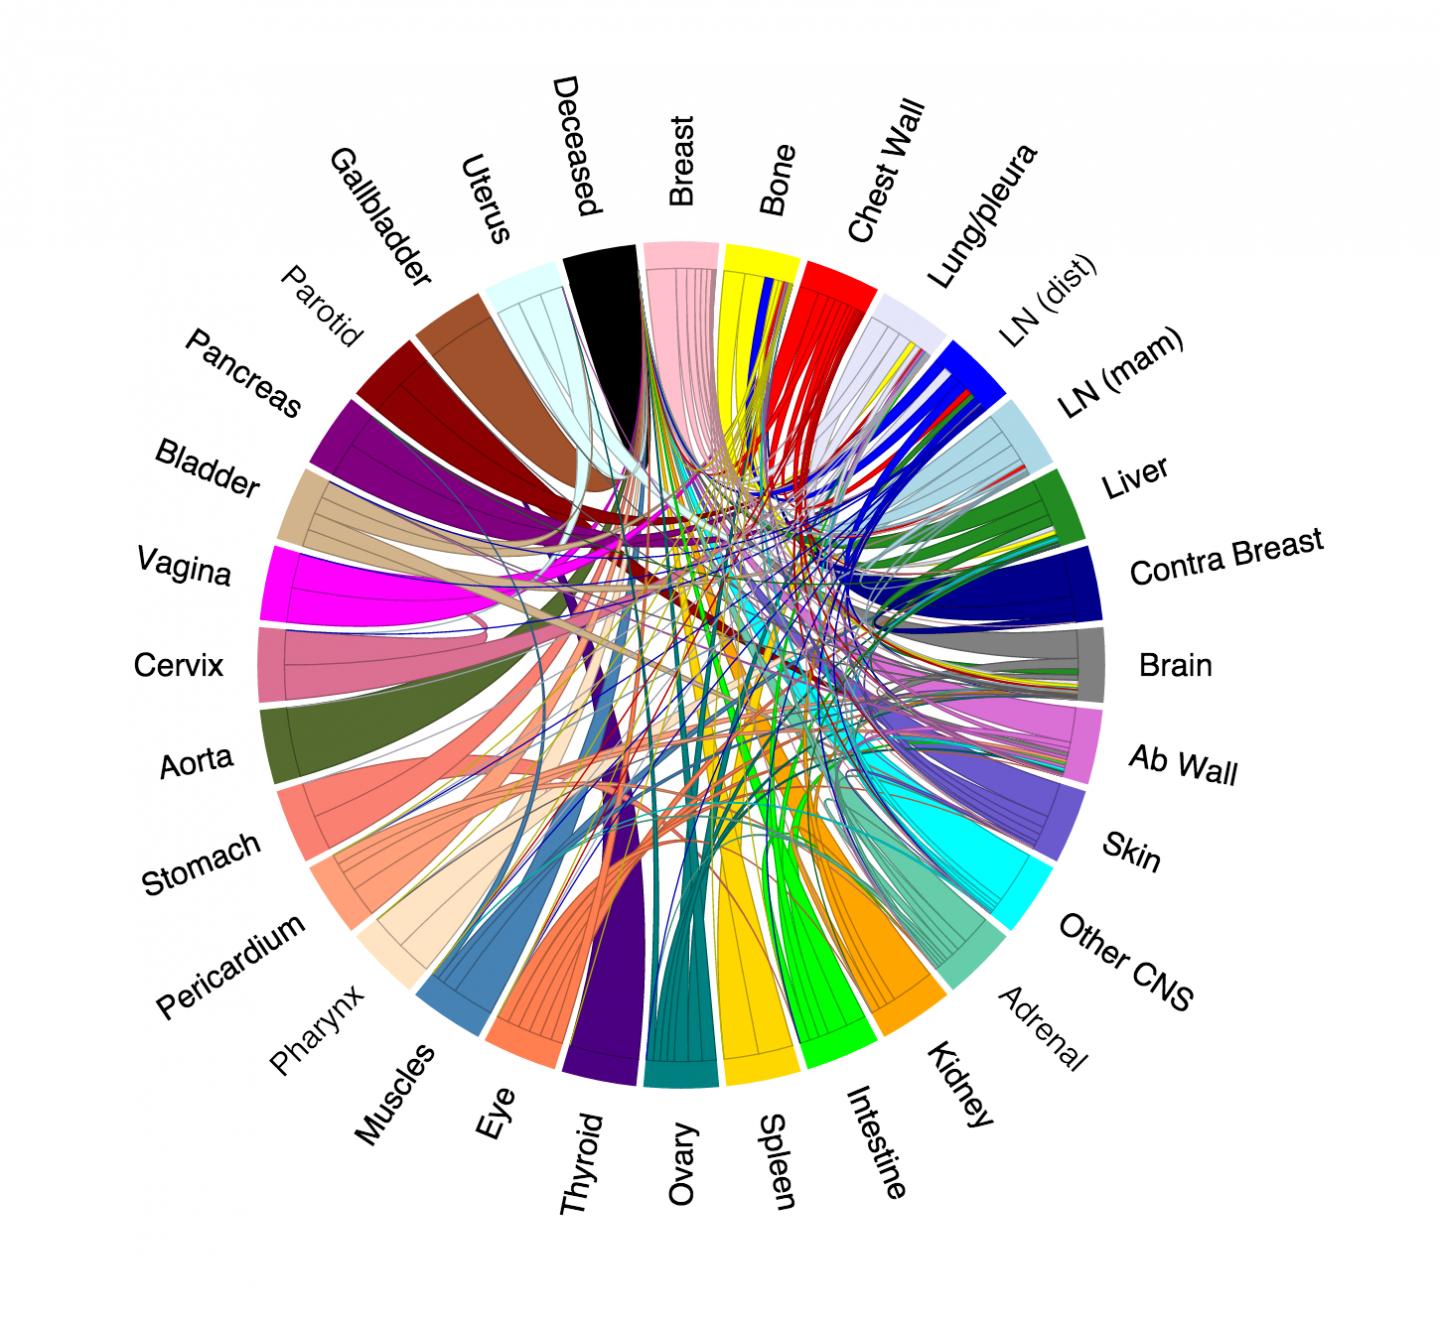 Markov Network of All Studied Breast Cancer Patients